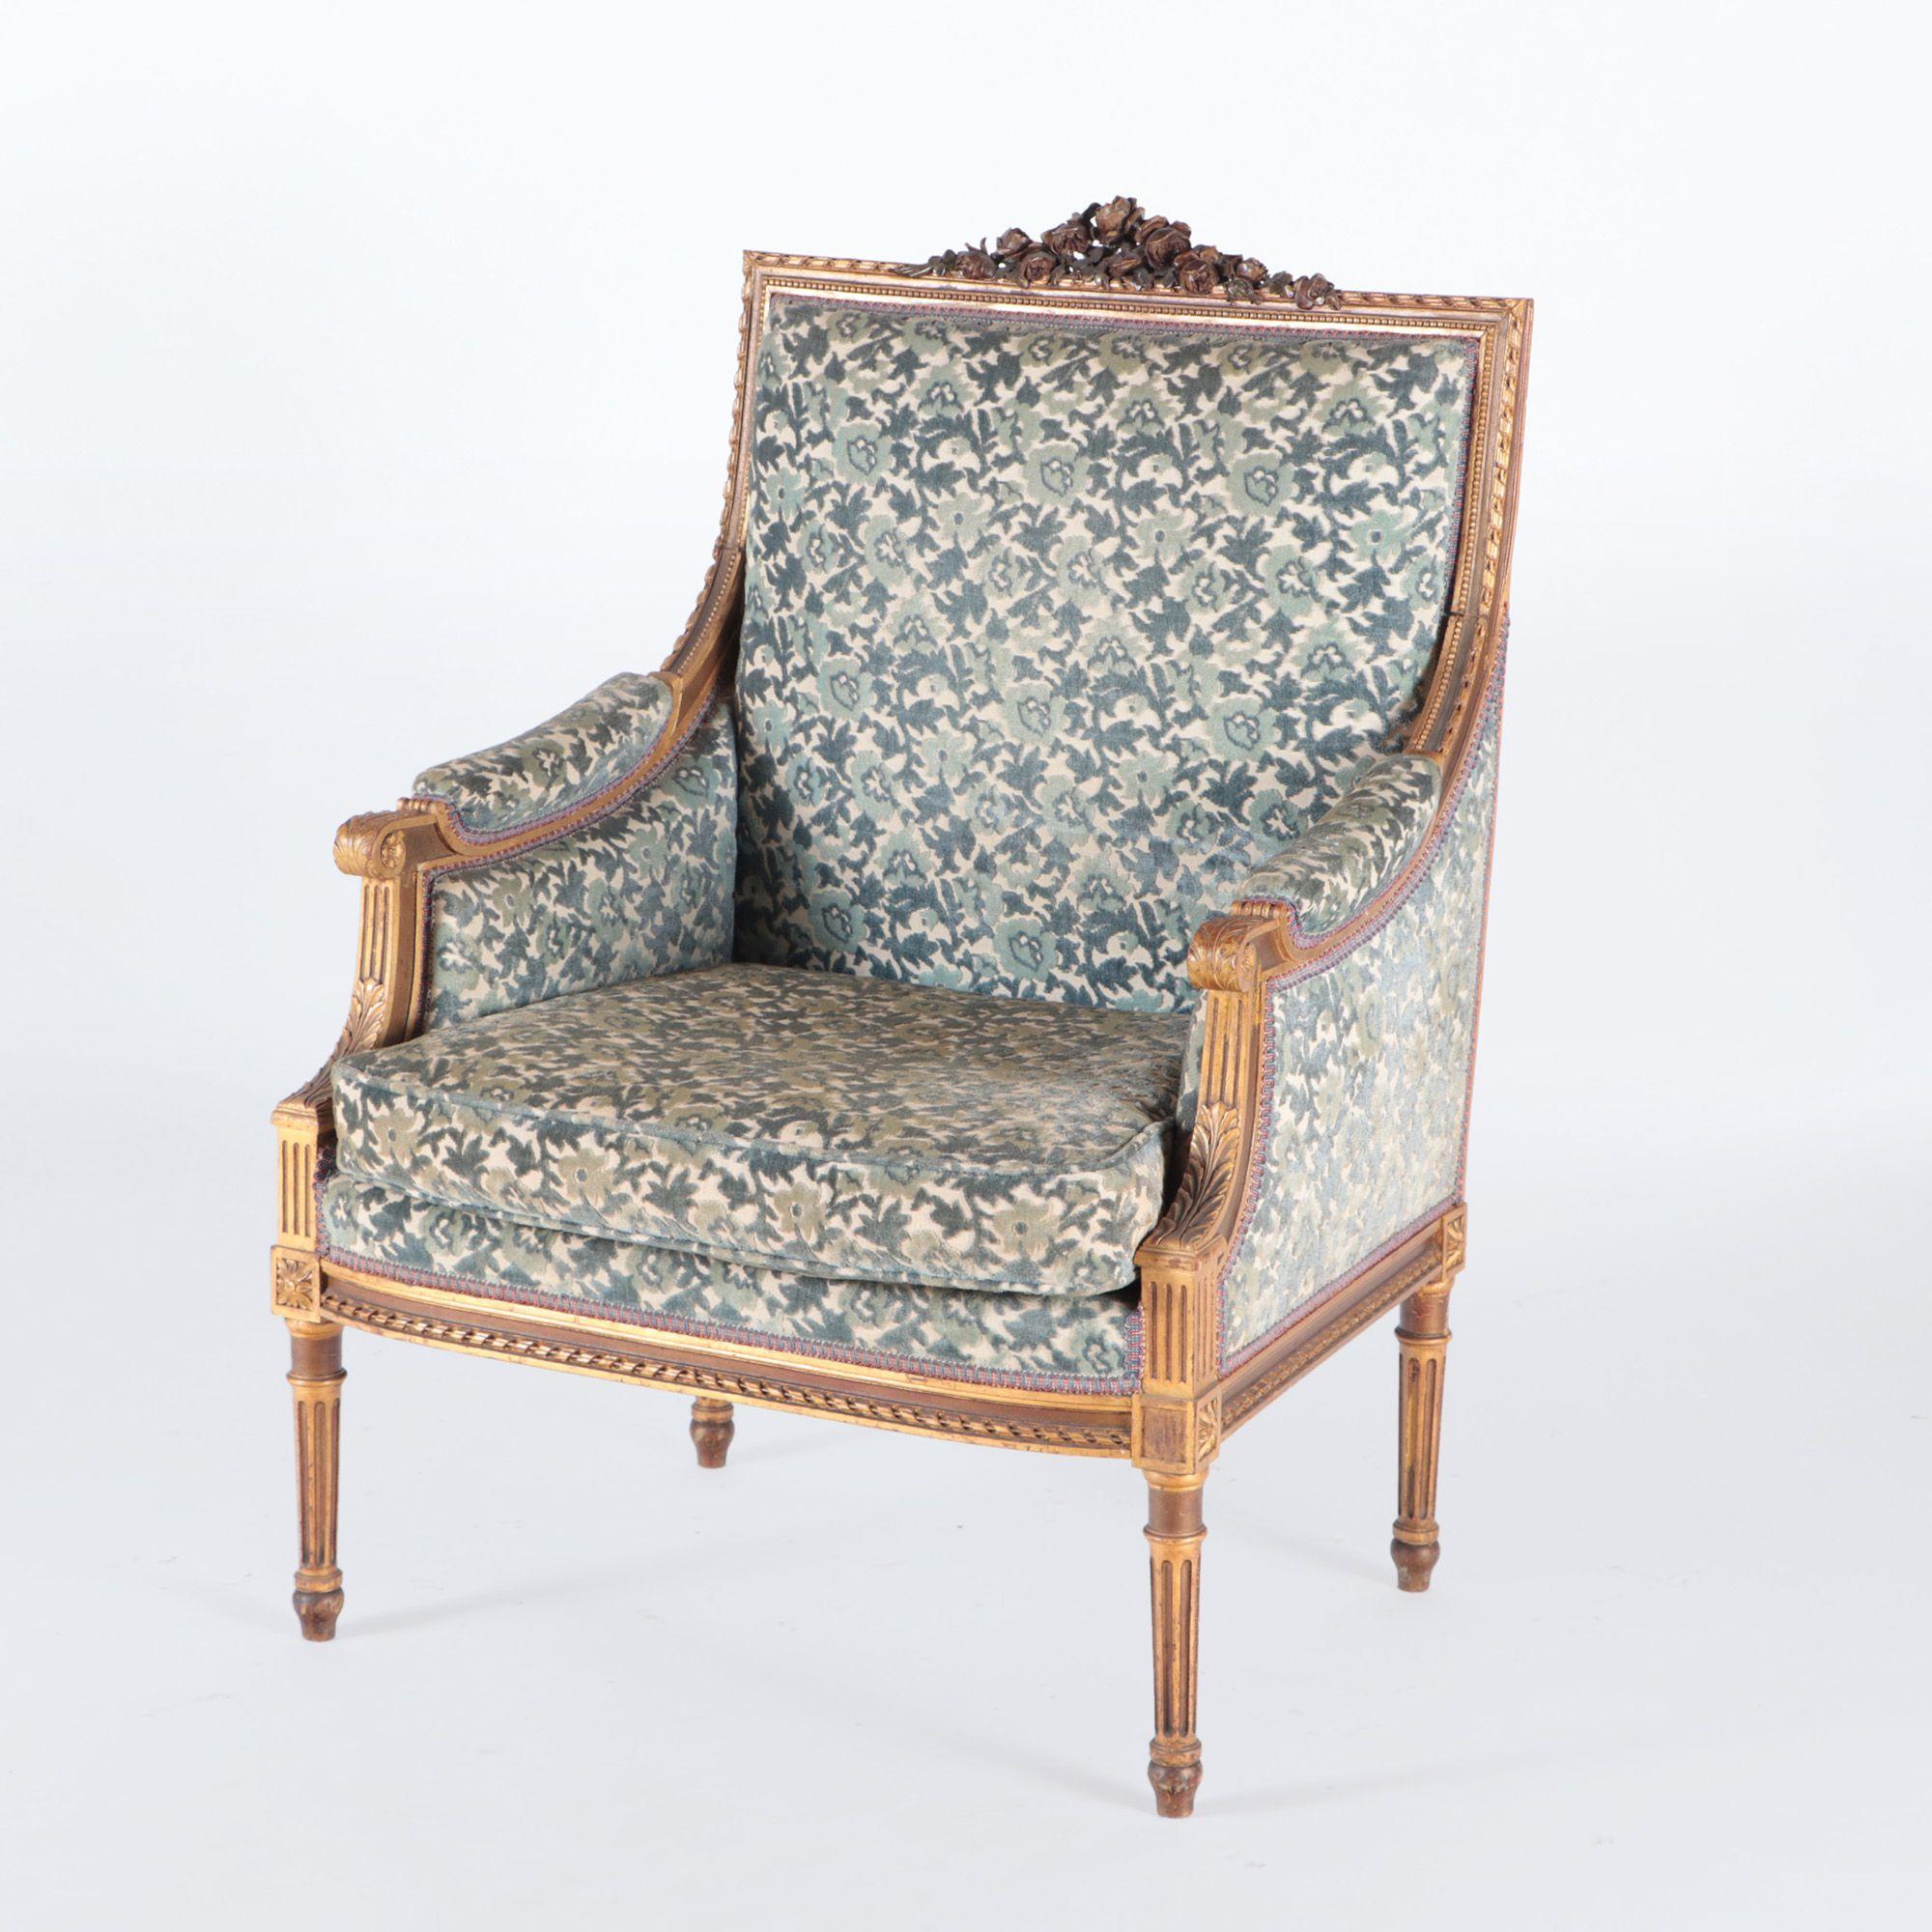 A pair of French Louis XVI style giltwood bergere chairs with carved crests on four square tapering legs. C 1900.